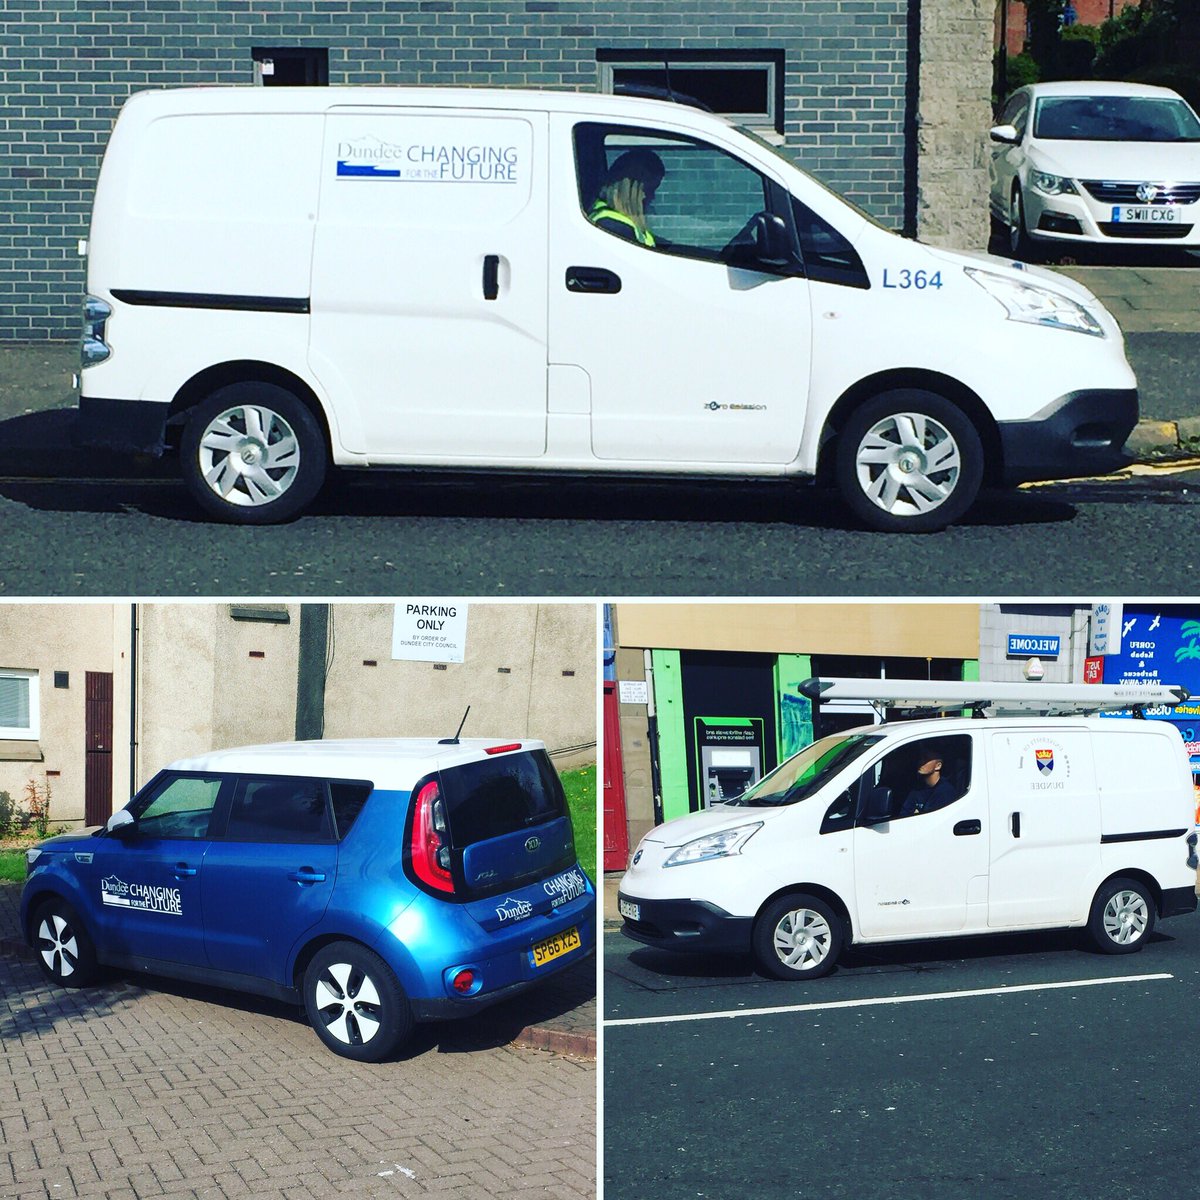 #simplyamazing to see so many #ElectricFleet vehicles out and about working hard in #Dundee today! @DundeeElectric @DundeeCouncil @dundeeuni @GreenFleetNews @LynnesnpR